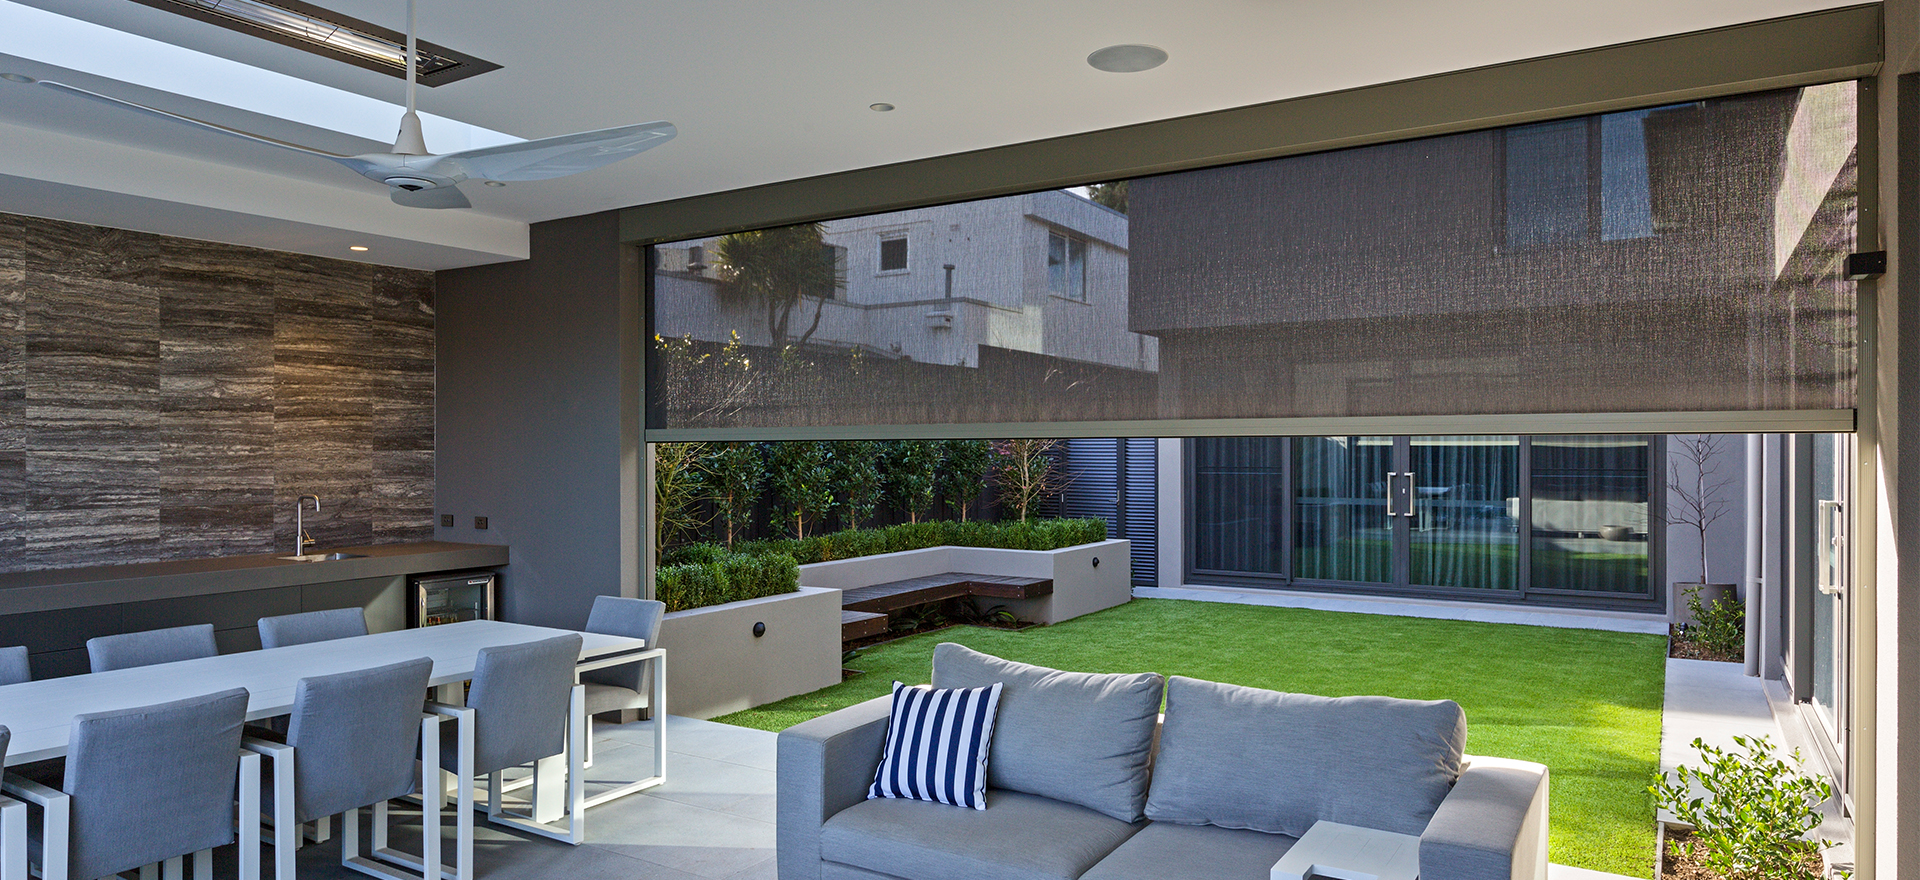 Outdoor Shades - Automate US